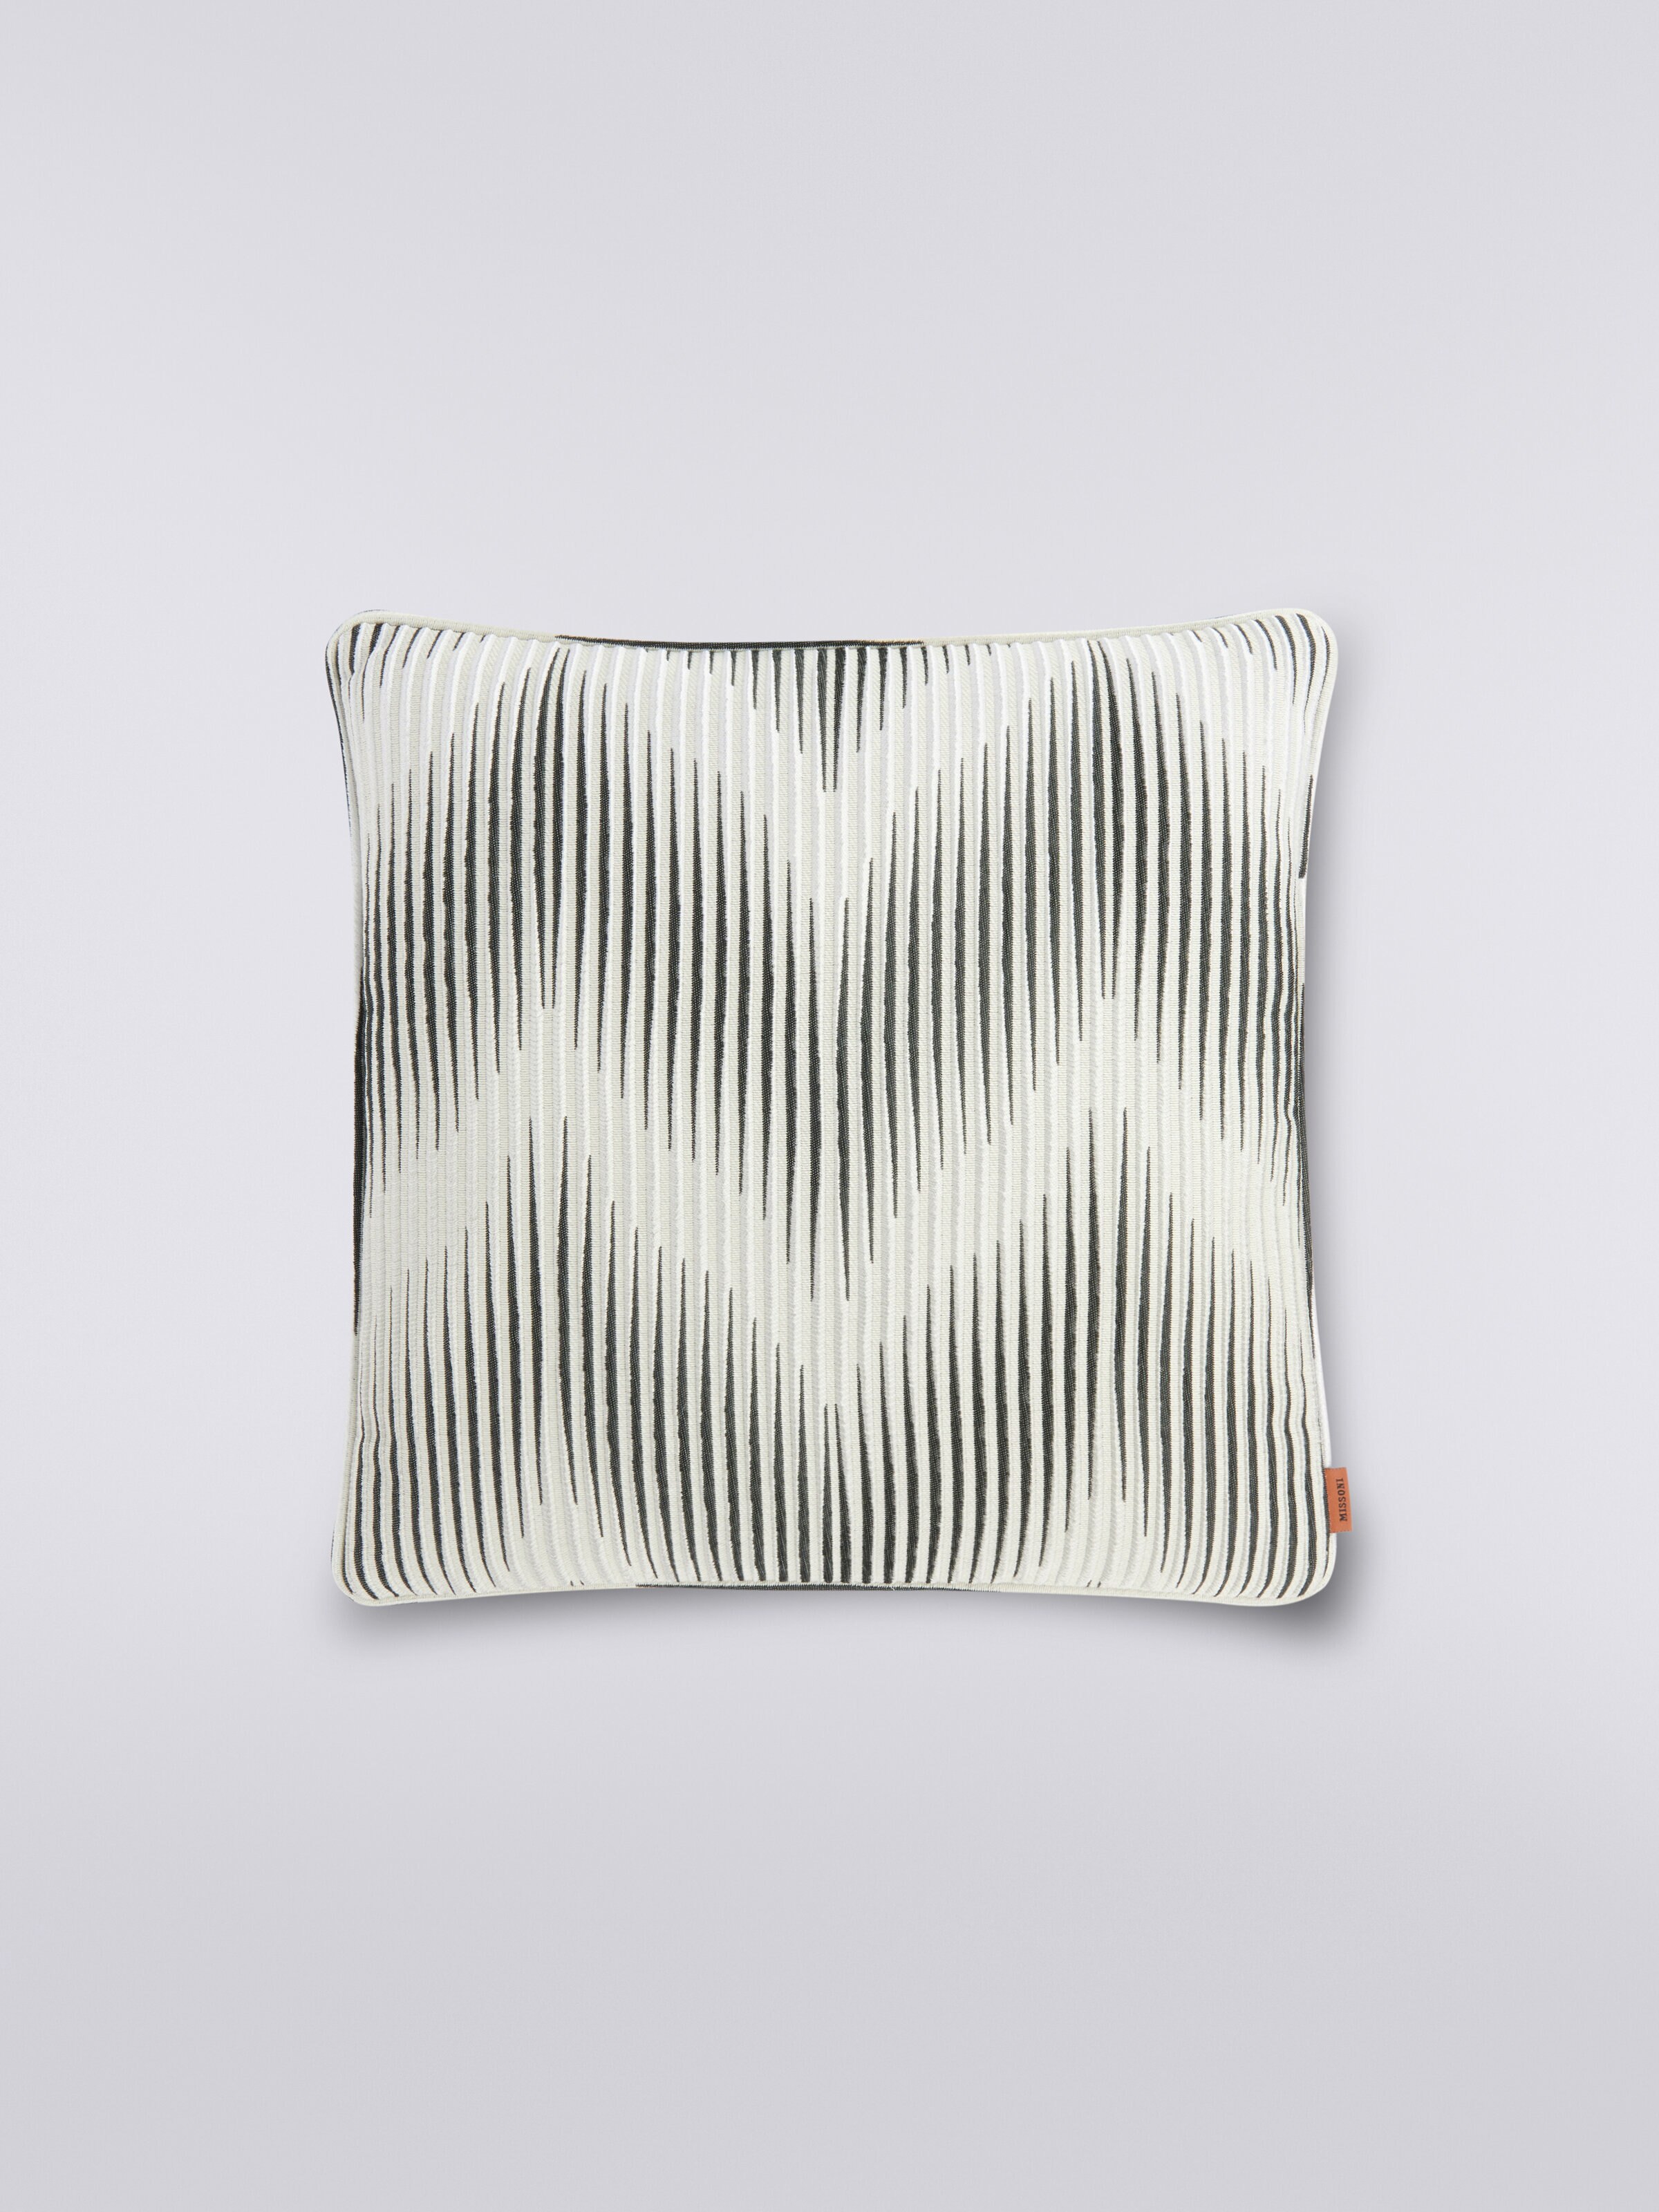 Ande 40x40 cm cushion with faded chevron, Black & White - 0